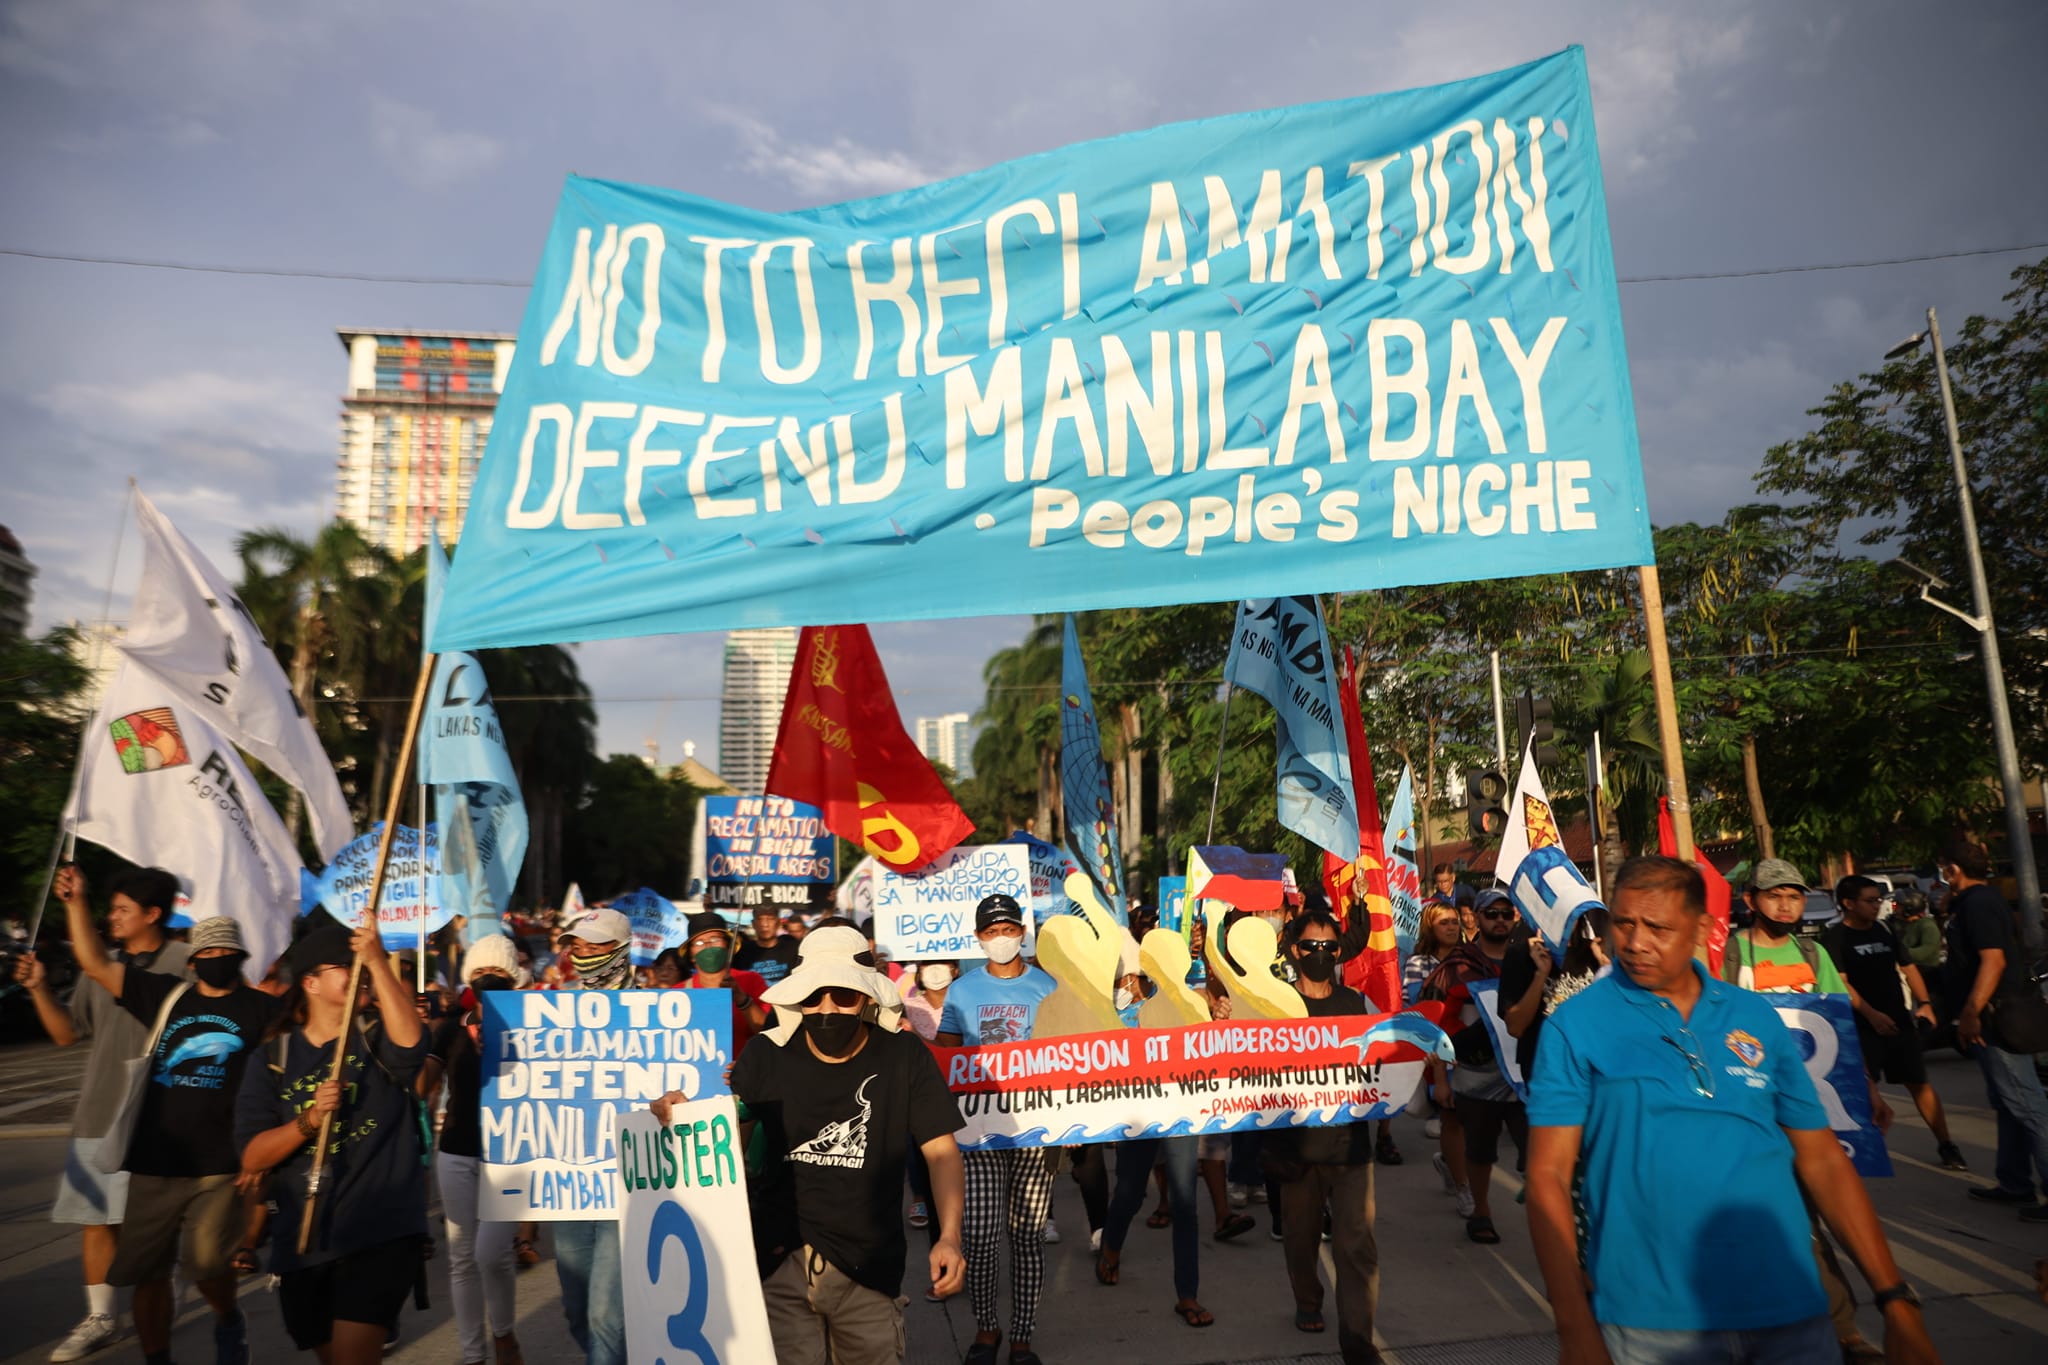 Hundreds form ‘human chain’ to call for full suspension of Manila Bay reclamation